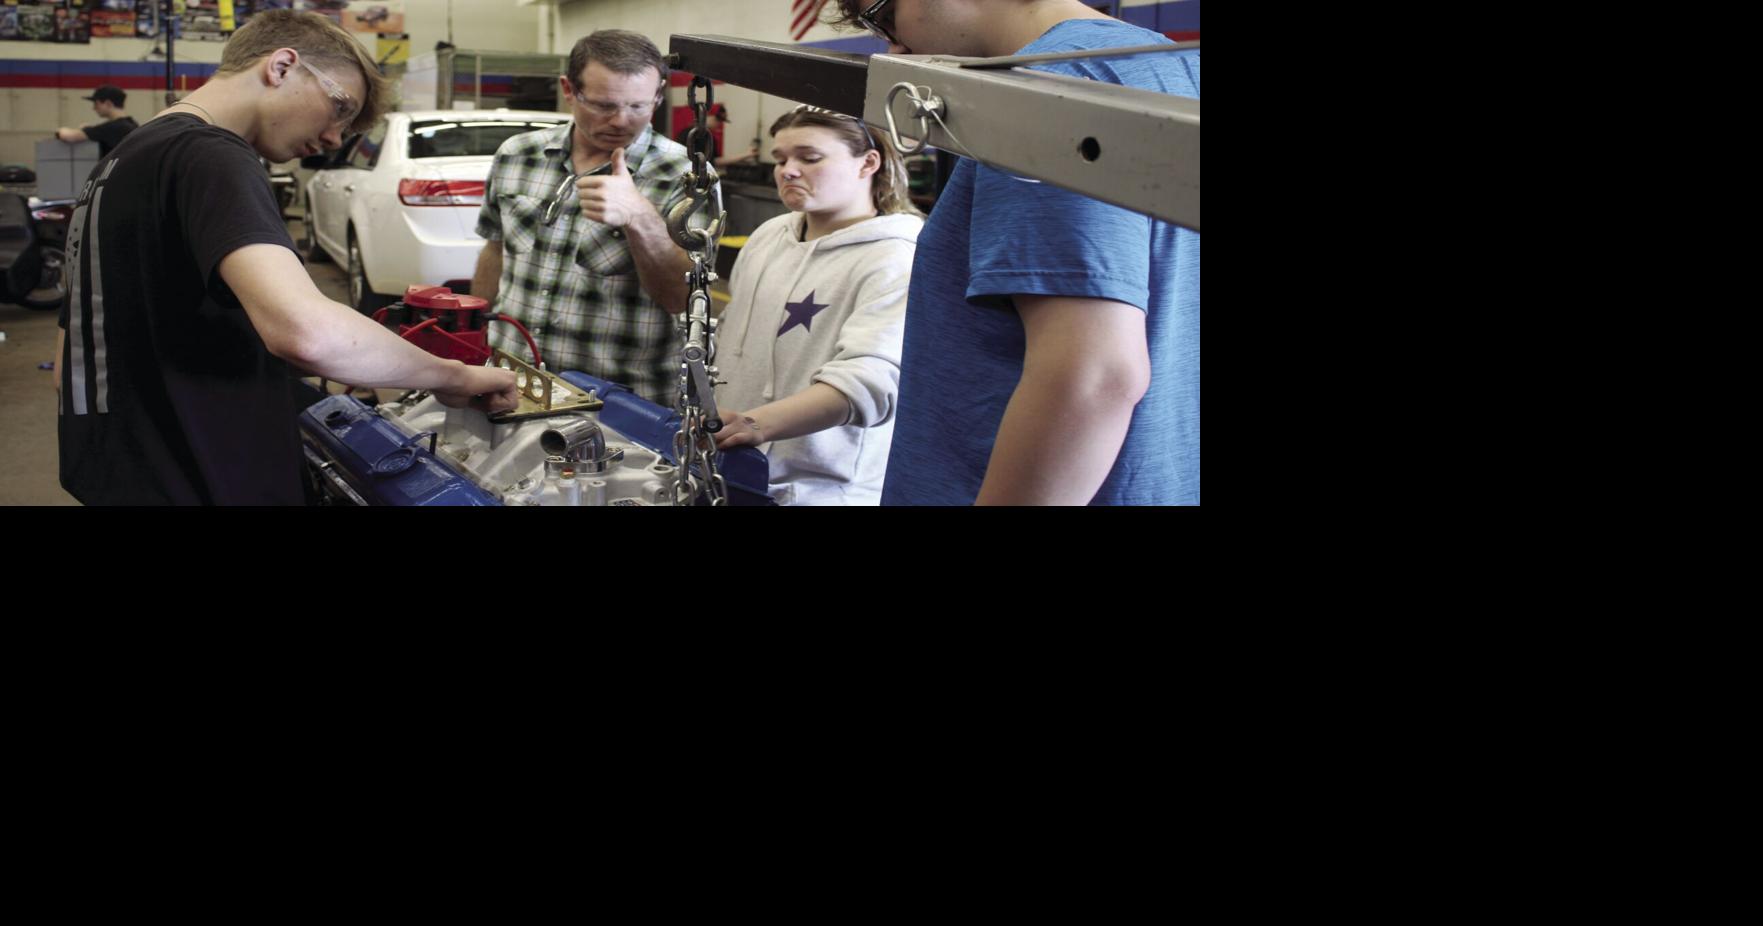 C-I auto repair class benefits from community support | Local News